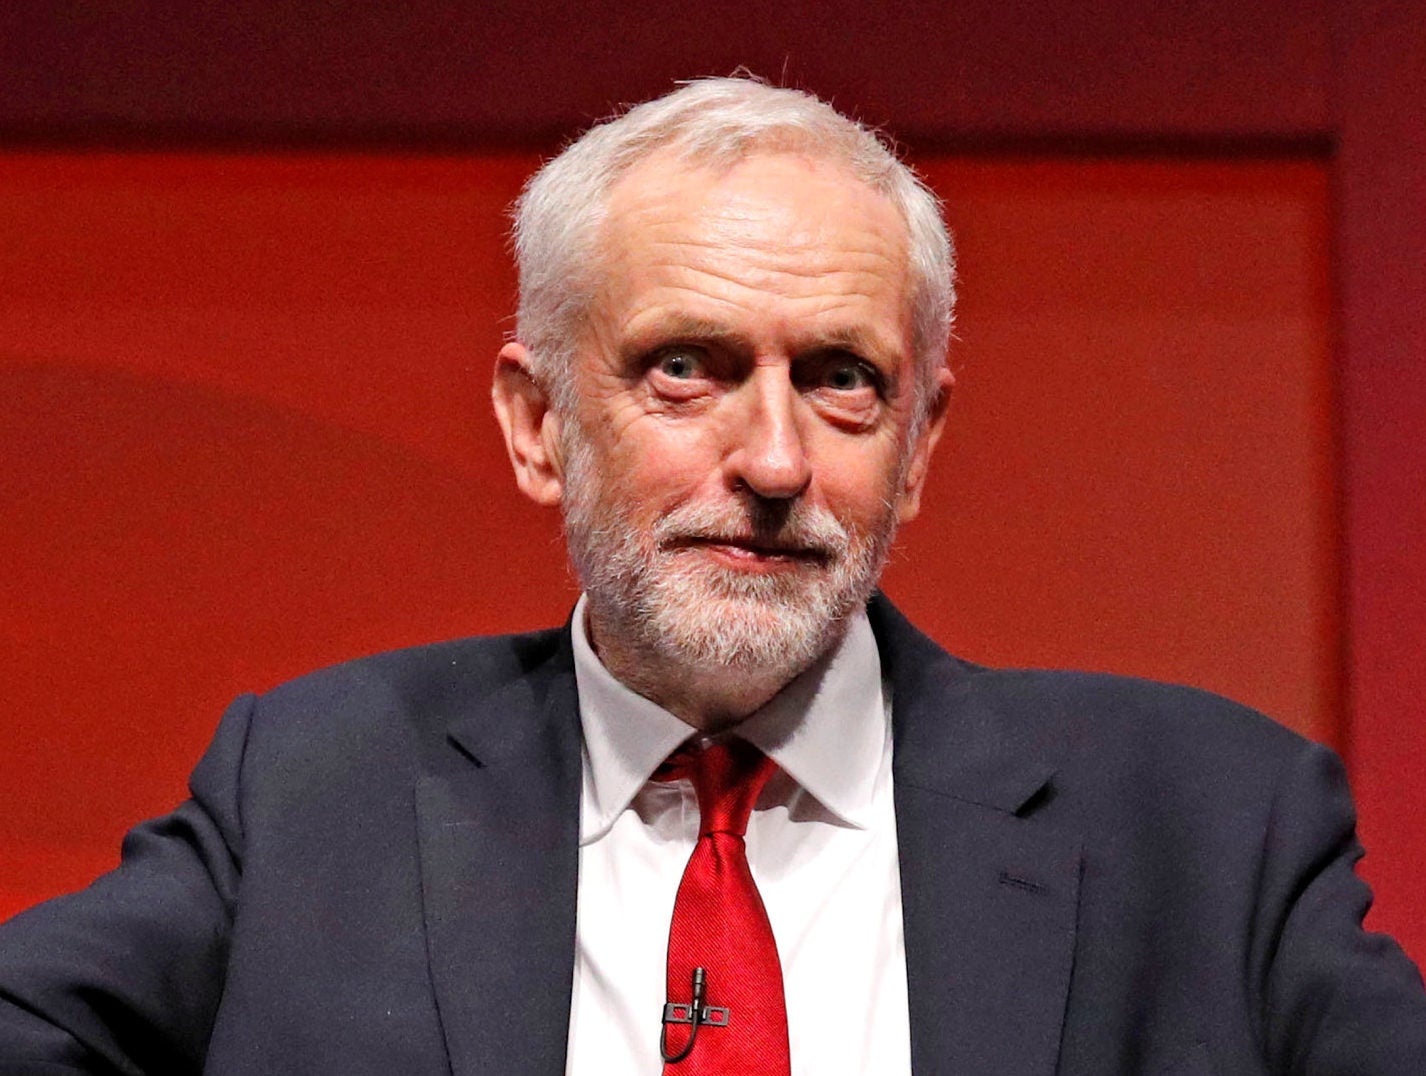 Labour drops complaint against six newspapers over Corbyn wreath coverage after email leak ‘unacceptably compromised’ IPSO process